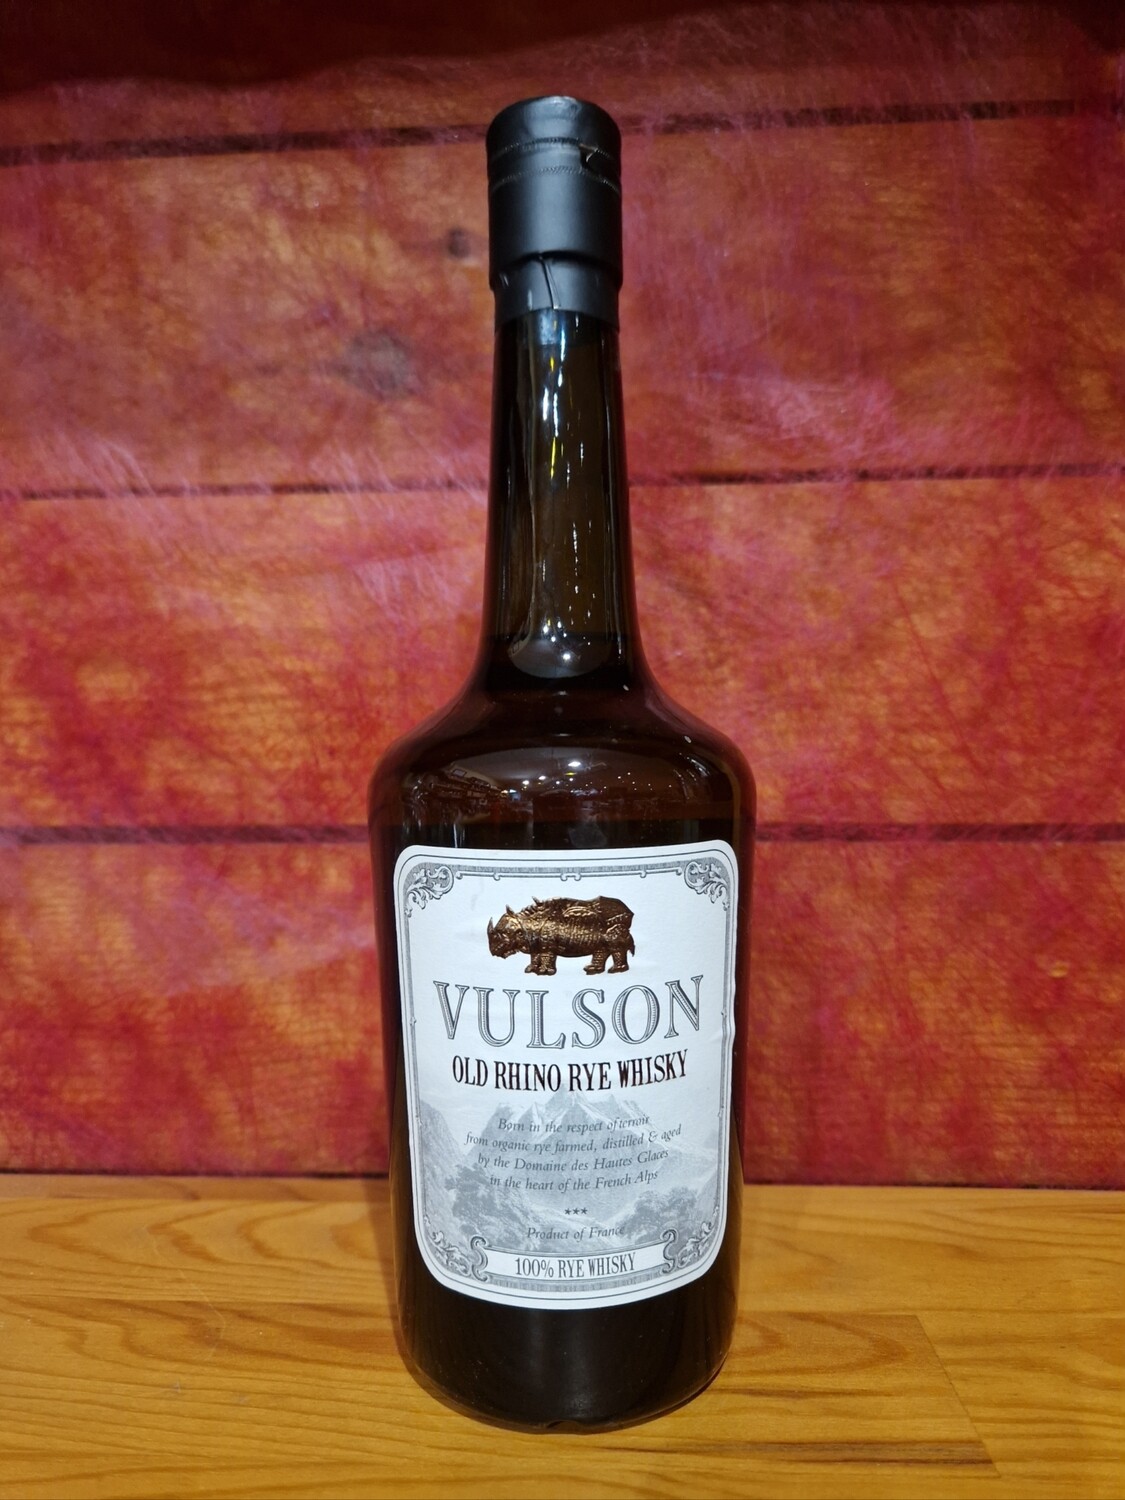 Vulson old rhino rye whisky domaine des hautes glaces